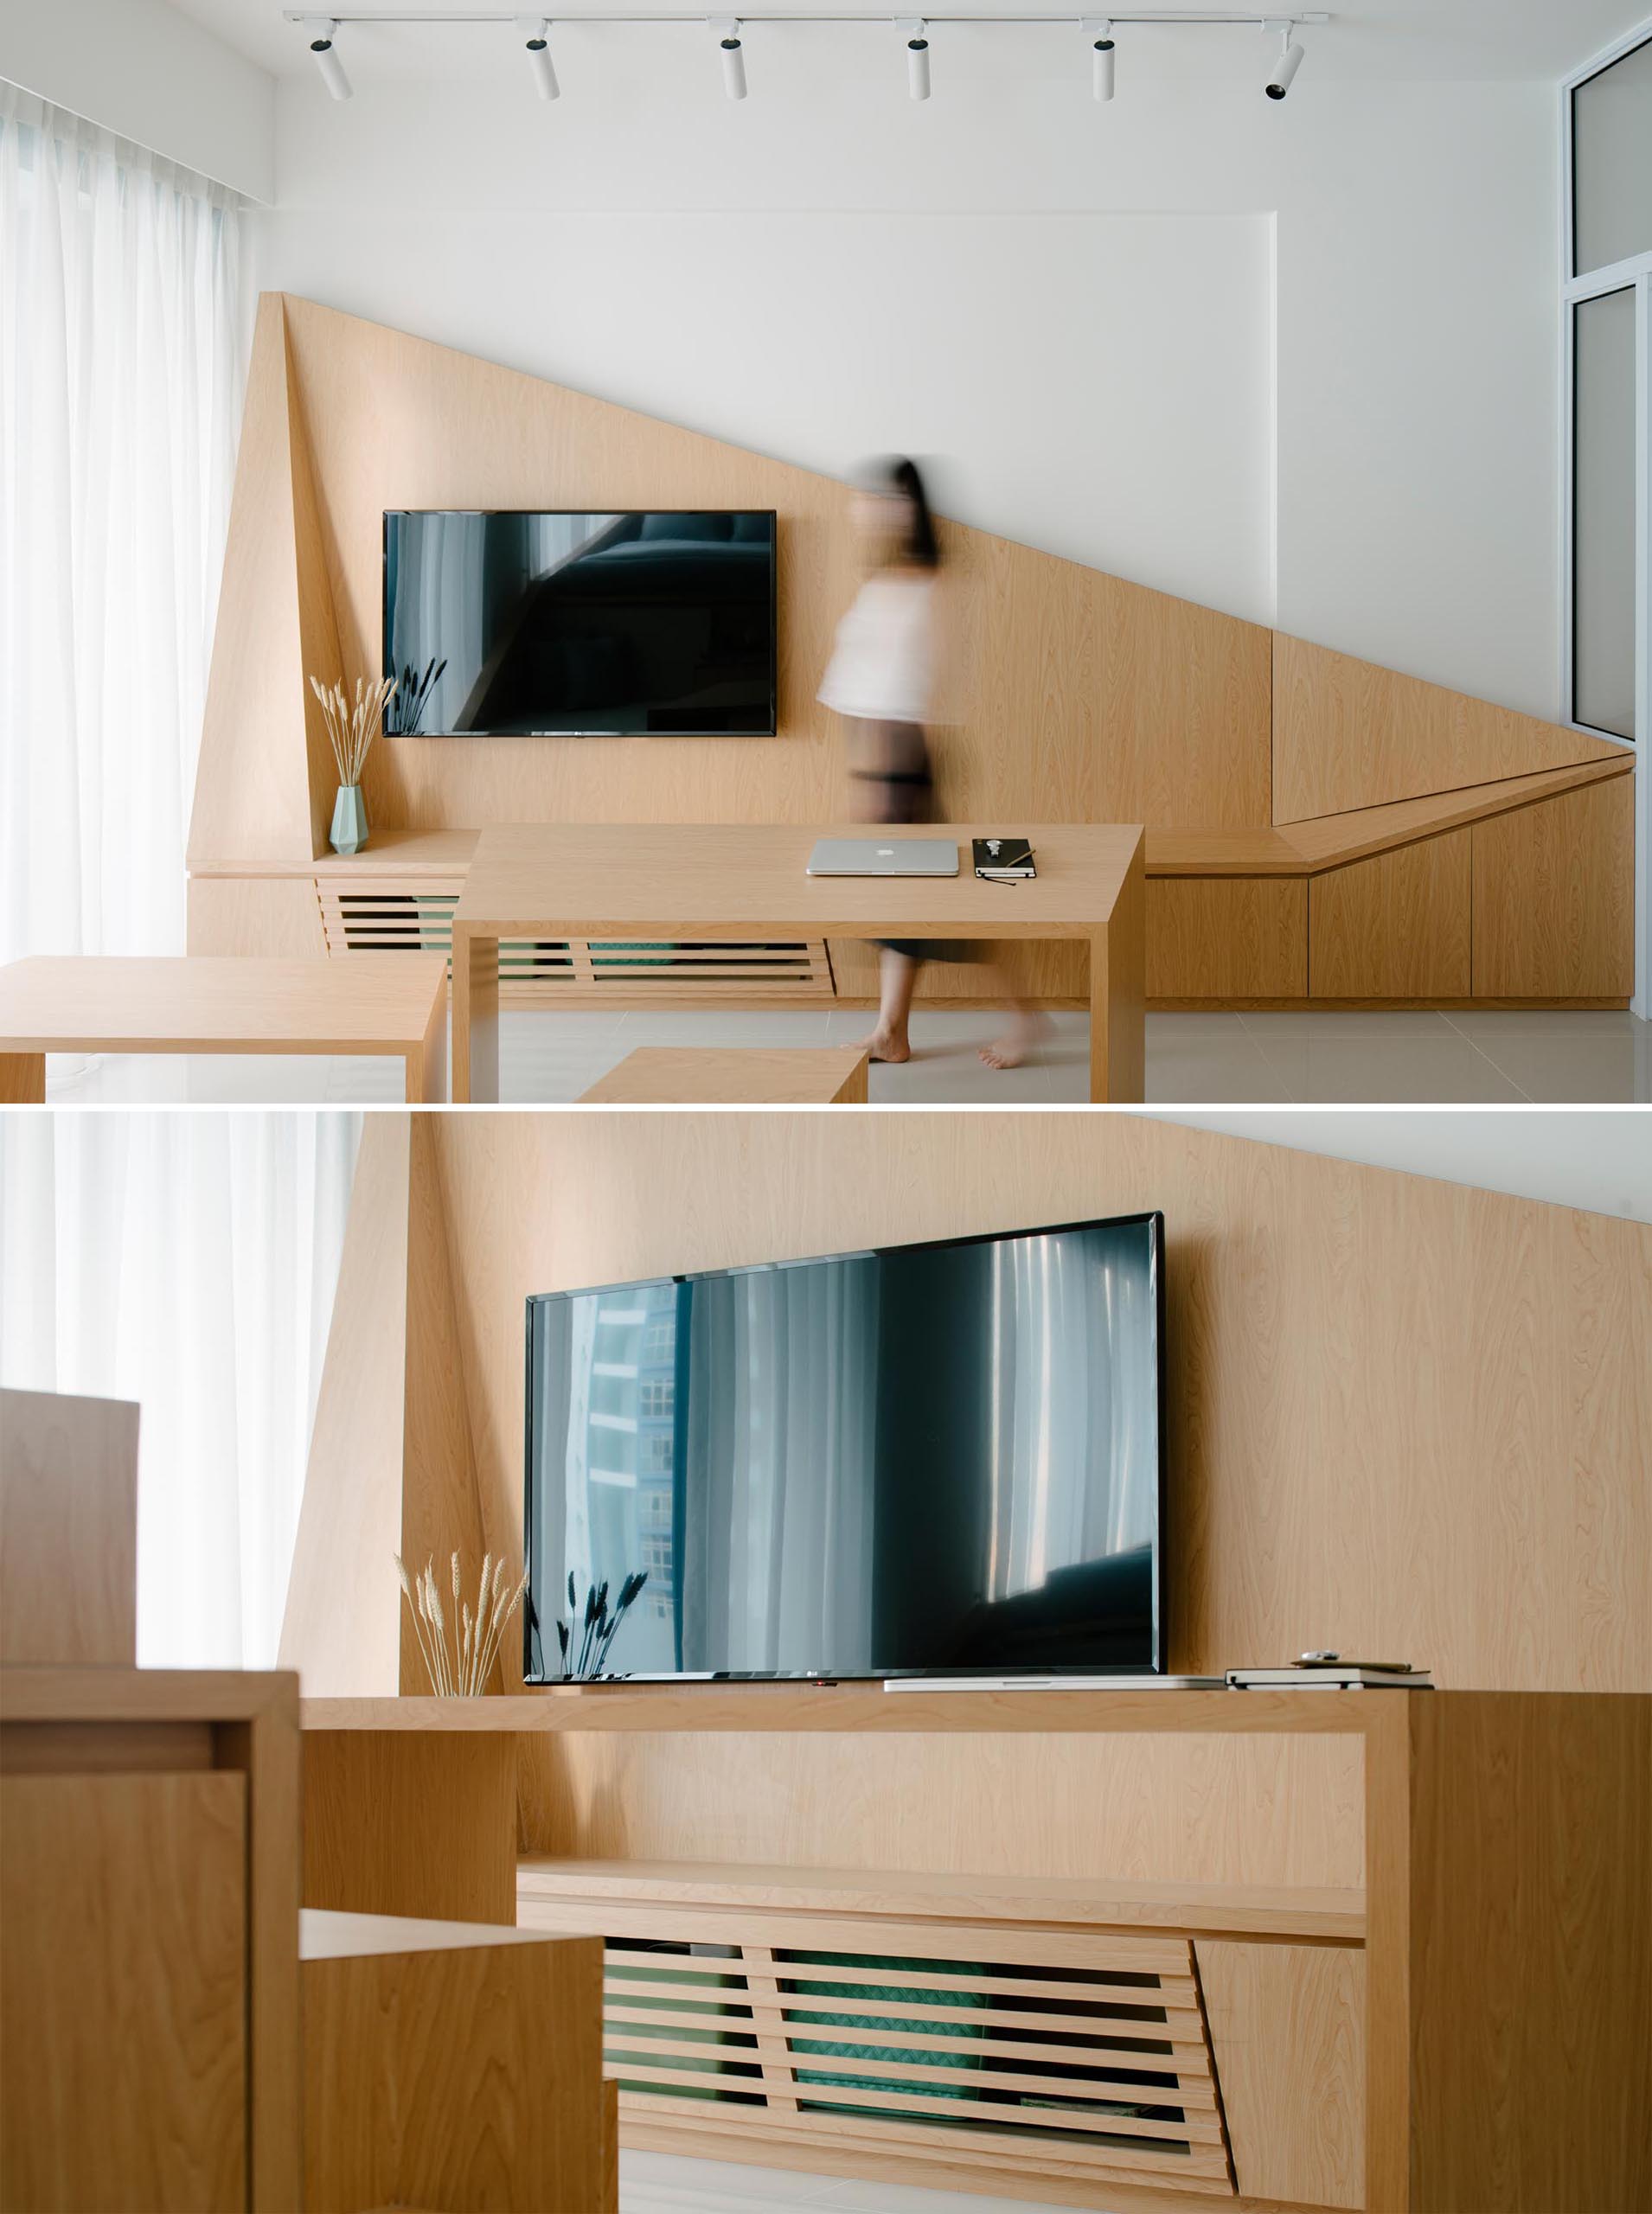 In a small apartment, a custom wood wall provides a backdrop for the television, adds interest with its angular design, and includes additional storage.